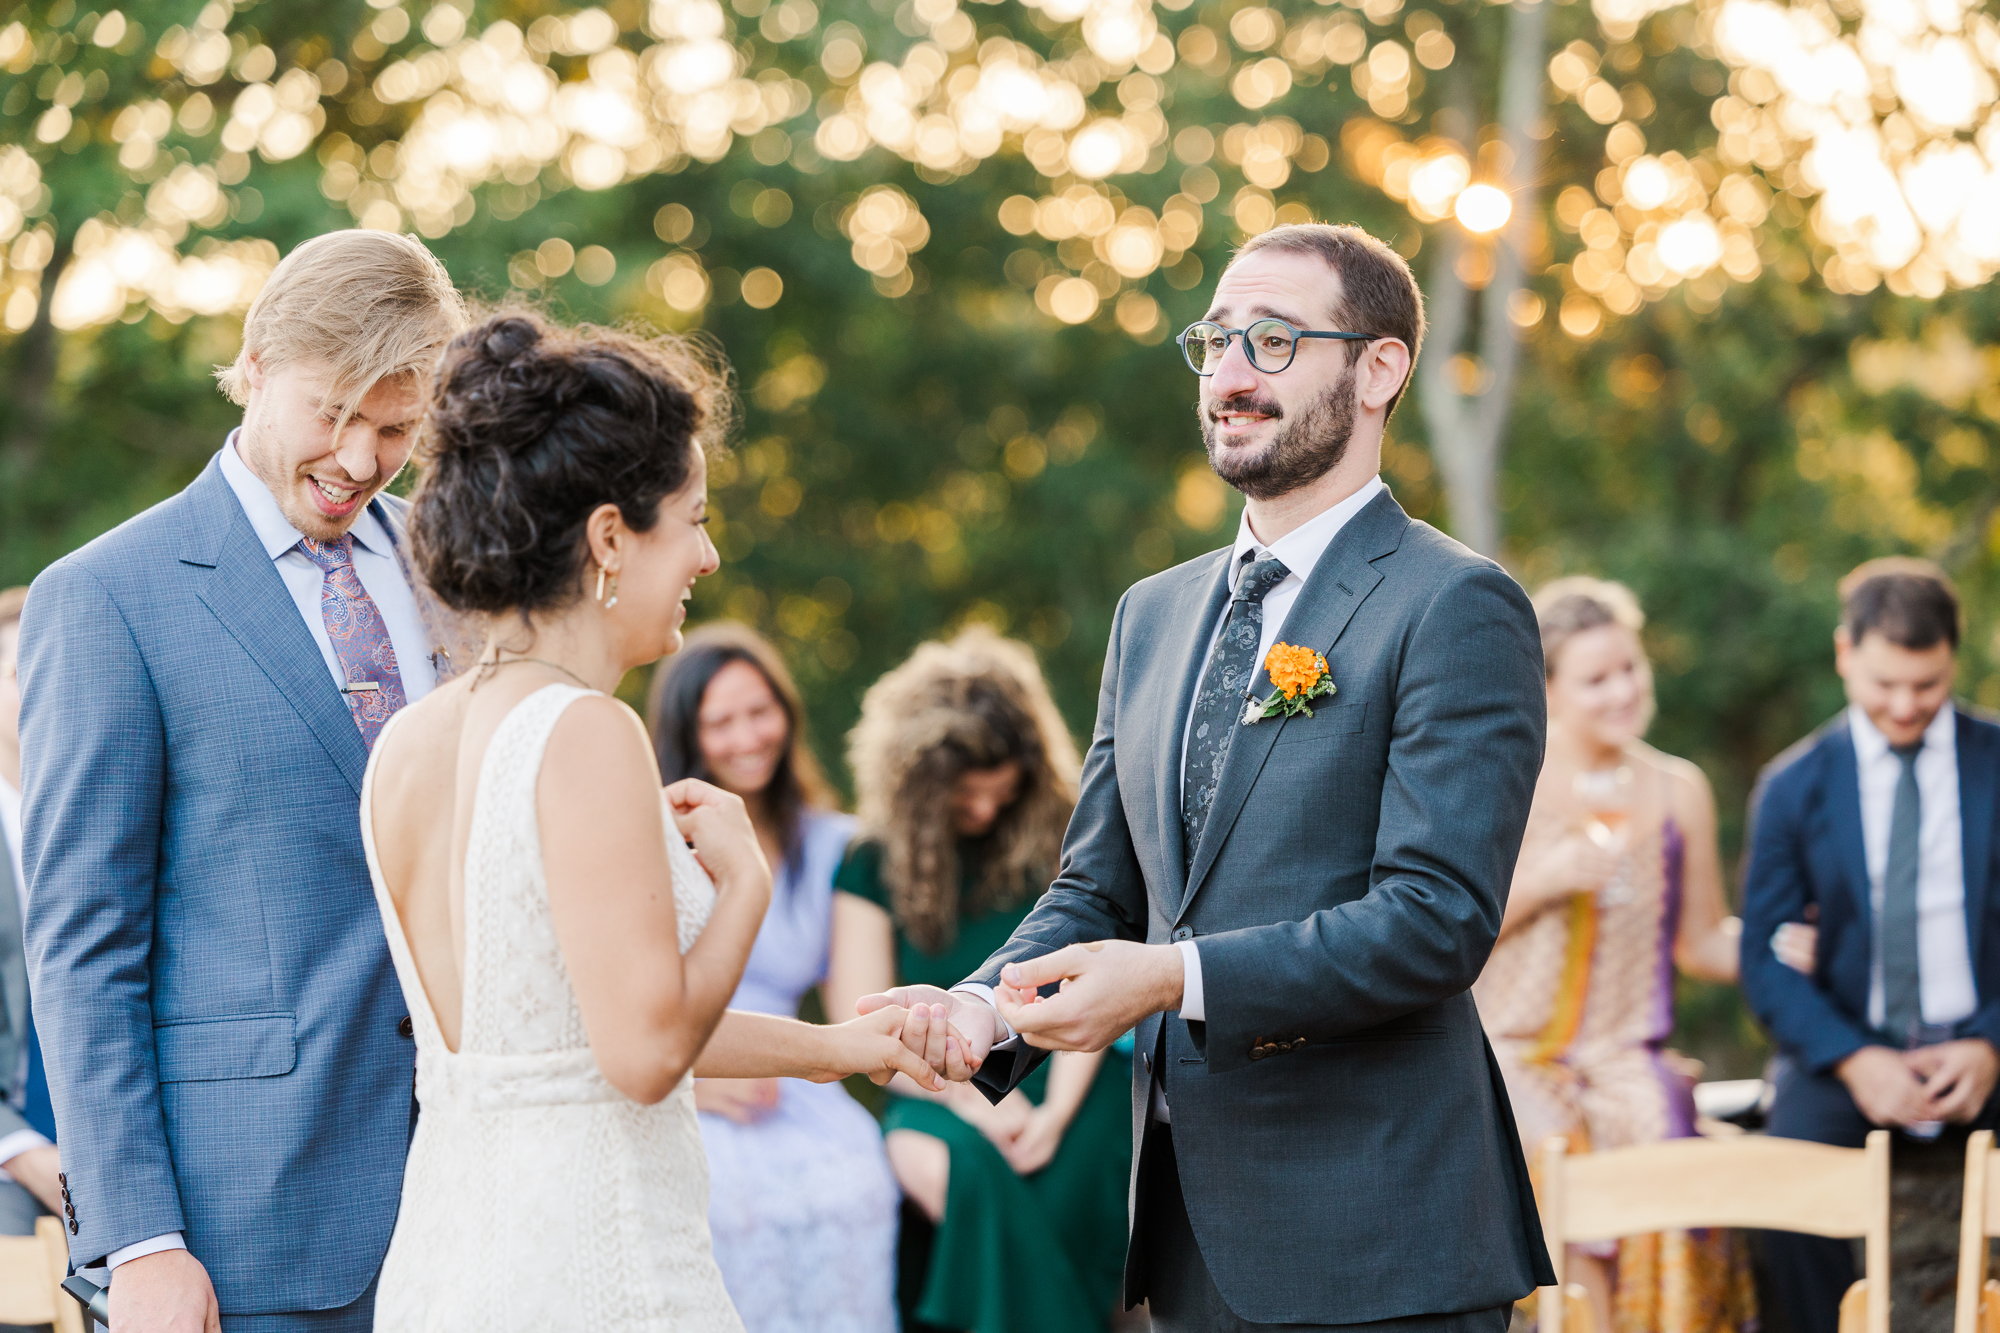 Whimsical Glynwood Farms Wedding in Cold Spring, NY